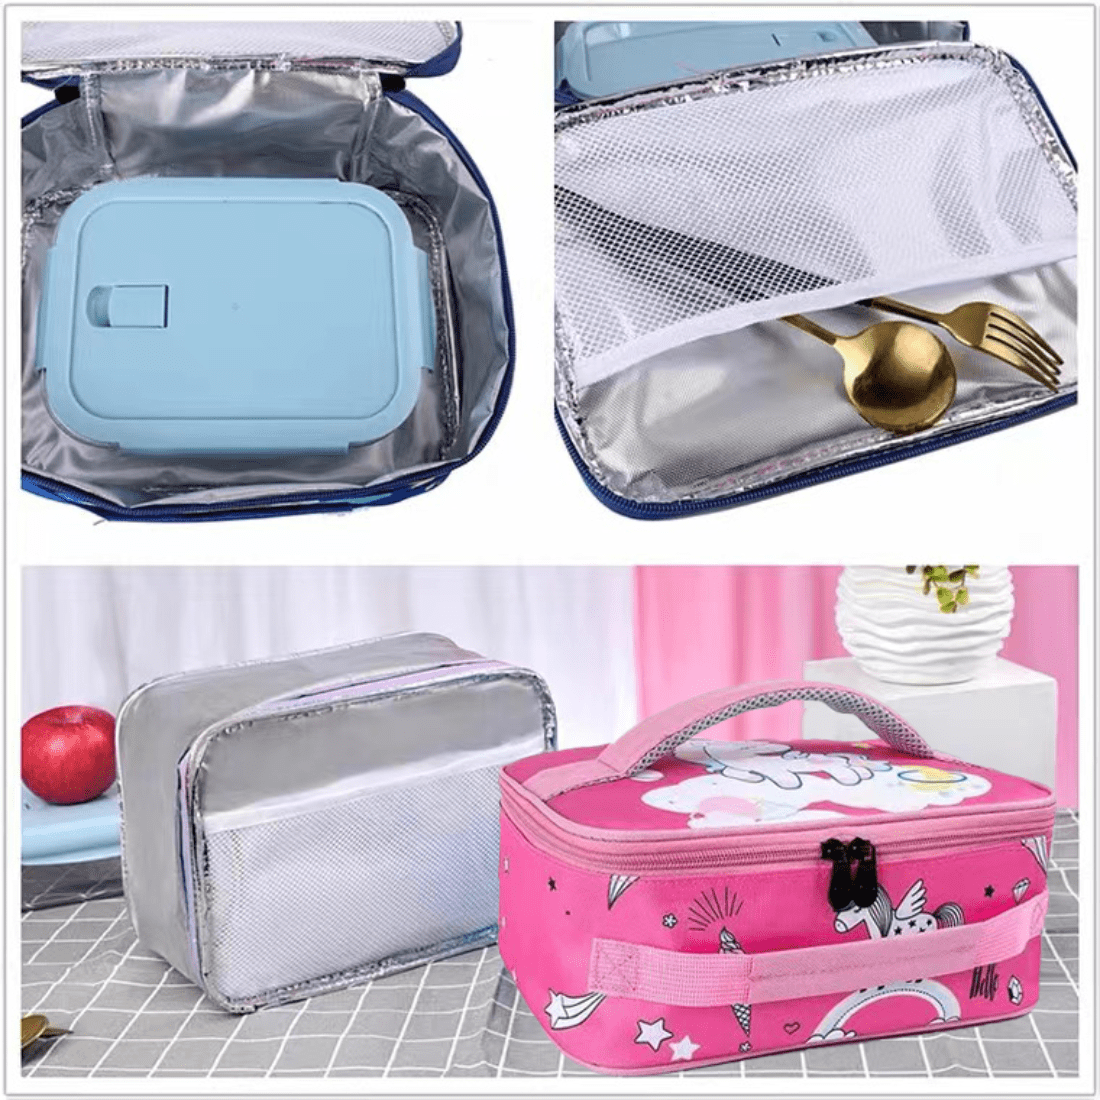 Children's Pu Laser Unicorn Lunch Box With Insulated Soft Bag, Mini Fridge,  Back To School Insulated Meal Carrier, School Water Bottle Holder, Cute  Small Lunch Tote, Soft & Compact Lunch Cooler Bag